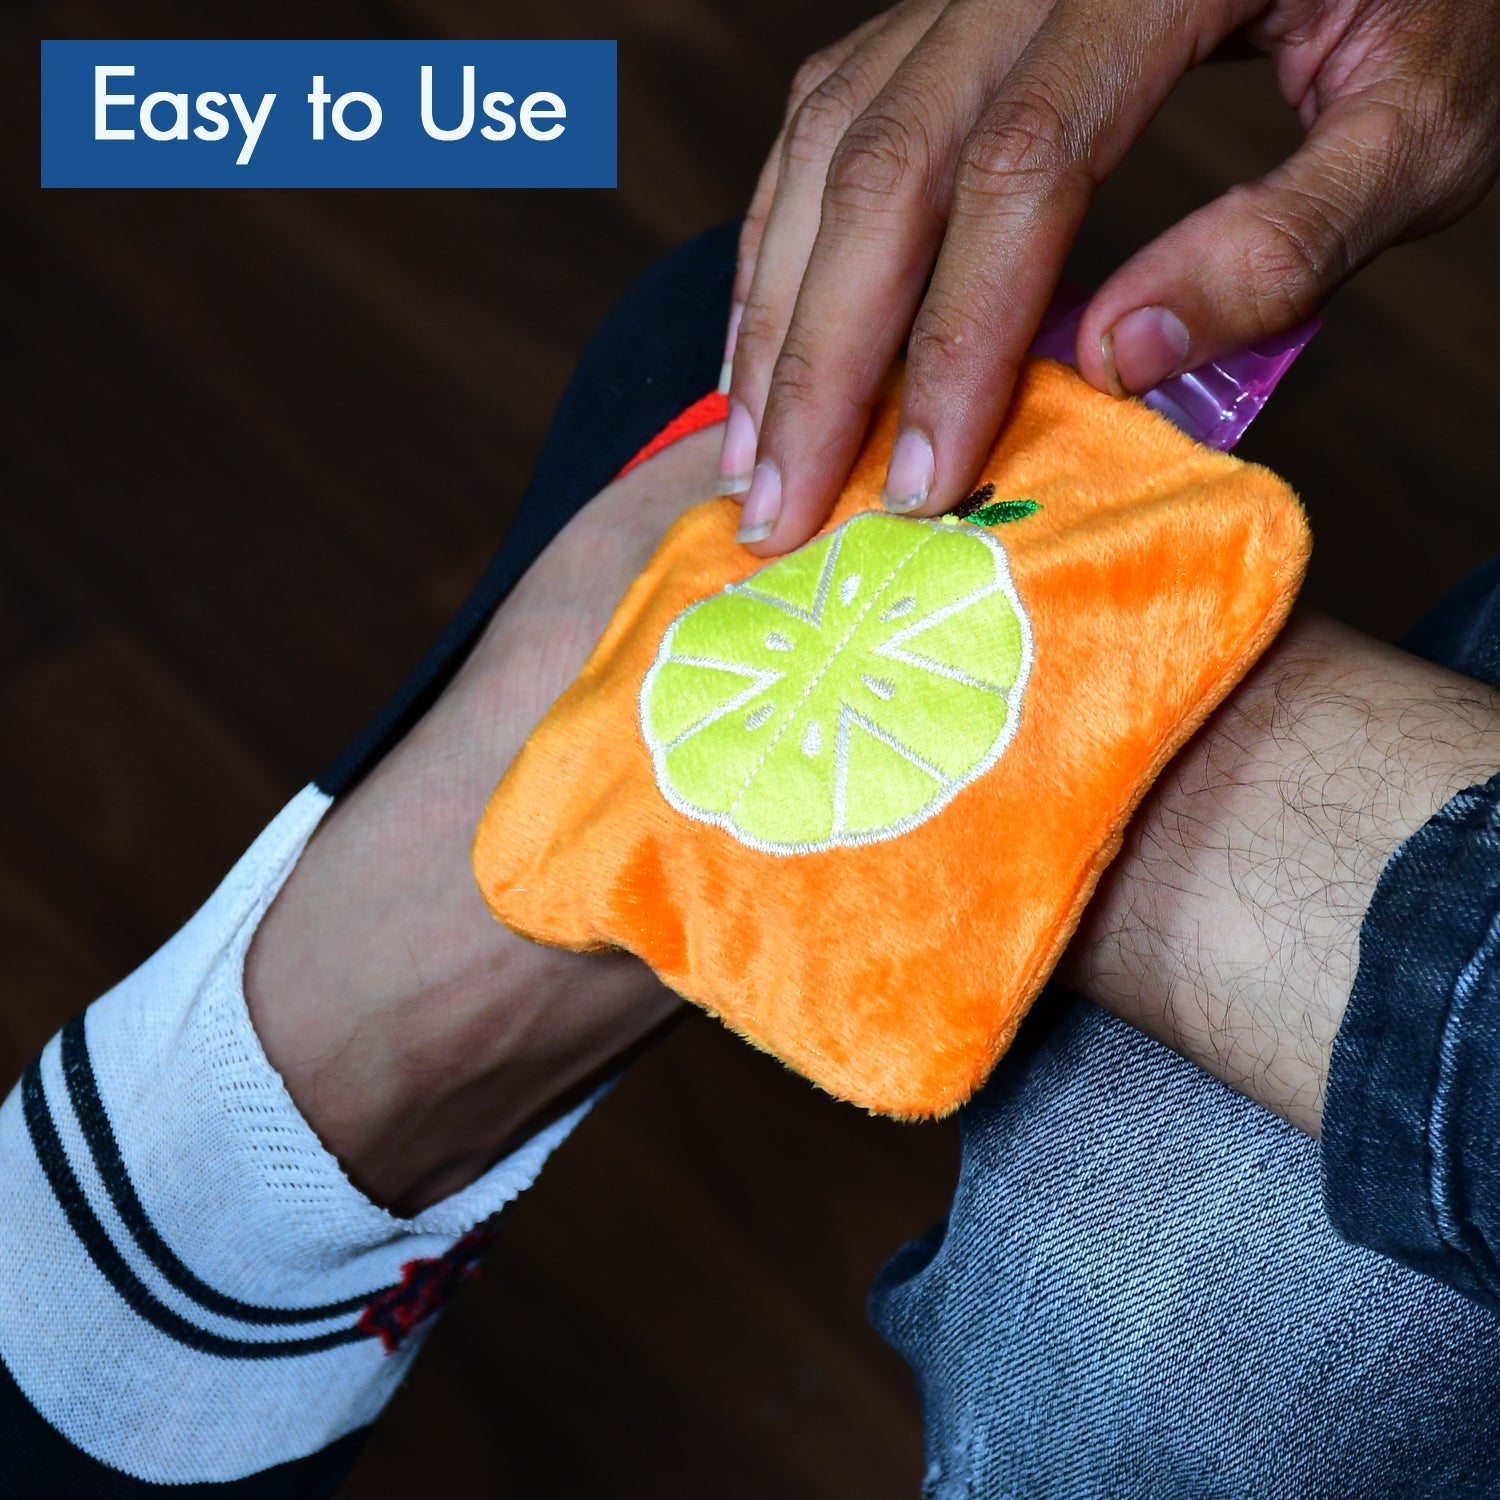 6510 Orange small Hot Water Bag with Cover for Pain Relief, Neck, Shoulder Pain and Hand, Feet Warmer, Menstrual Cramps. DeoDap